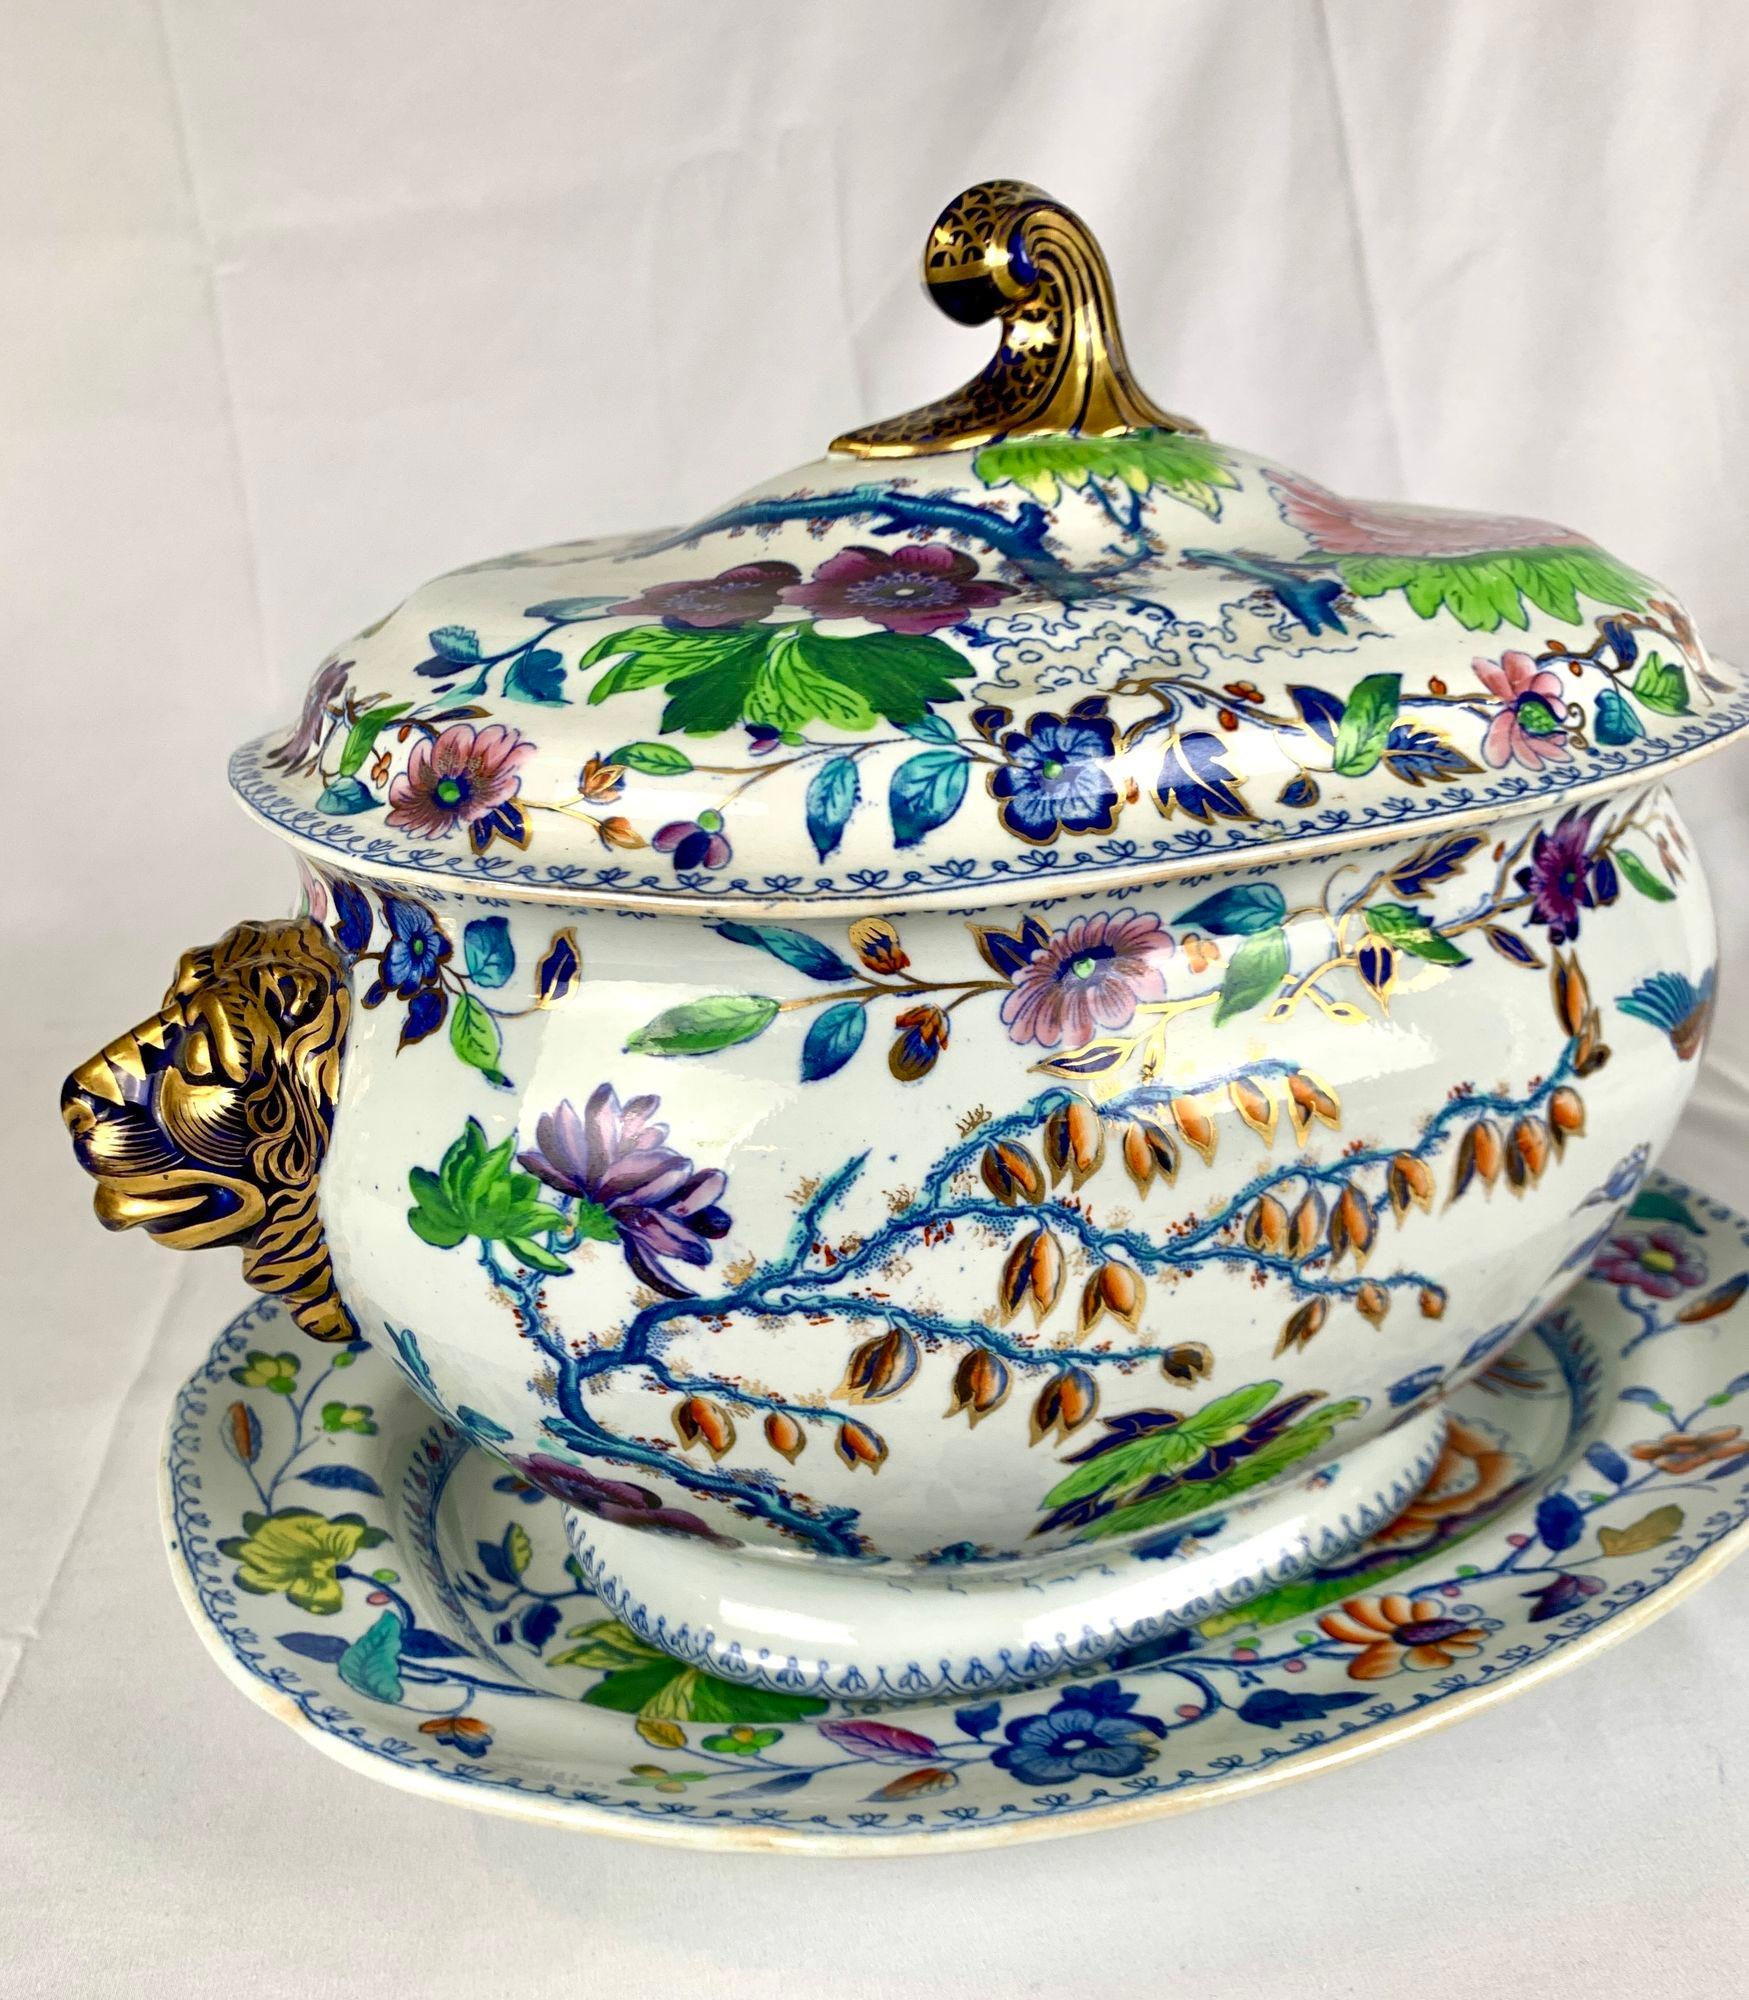 Large Soup Tureen Flying Bird Pattern Made in England Circa 1815 by Davenport 6